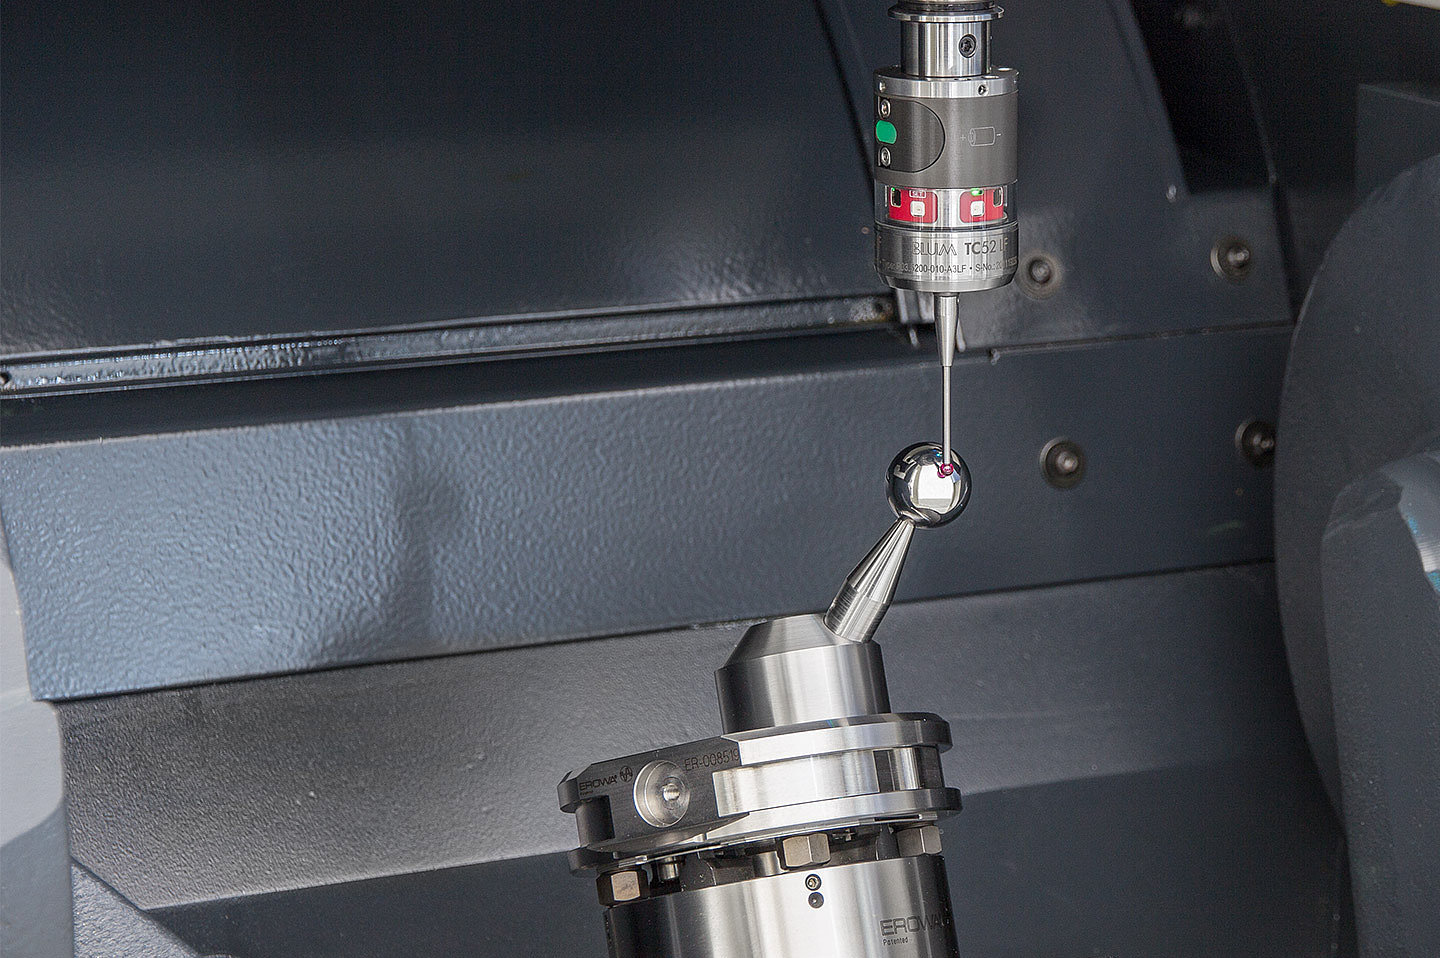 Measurement of 5-axis milling machines with BLUM measuring cycles